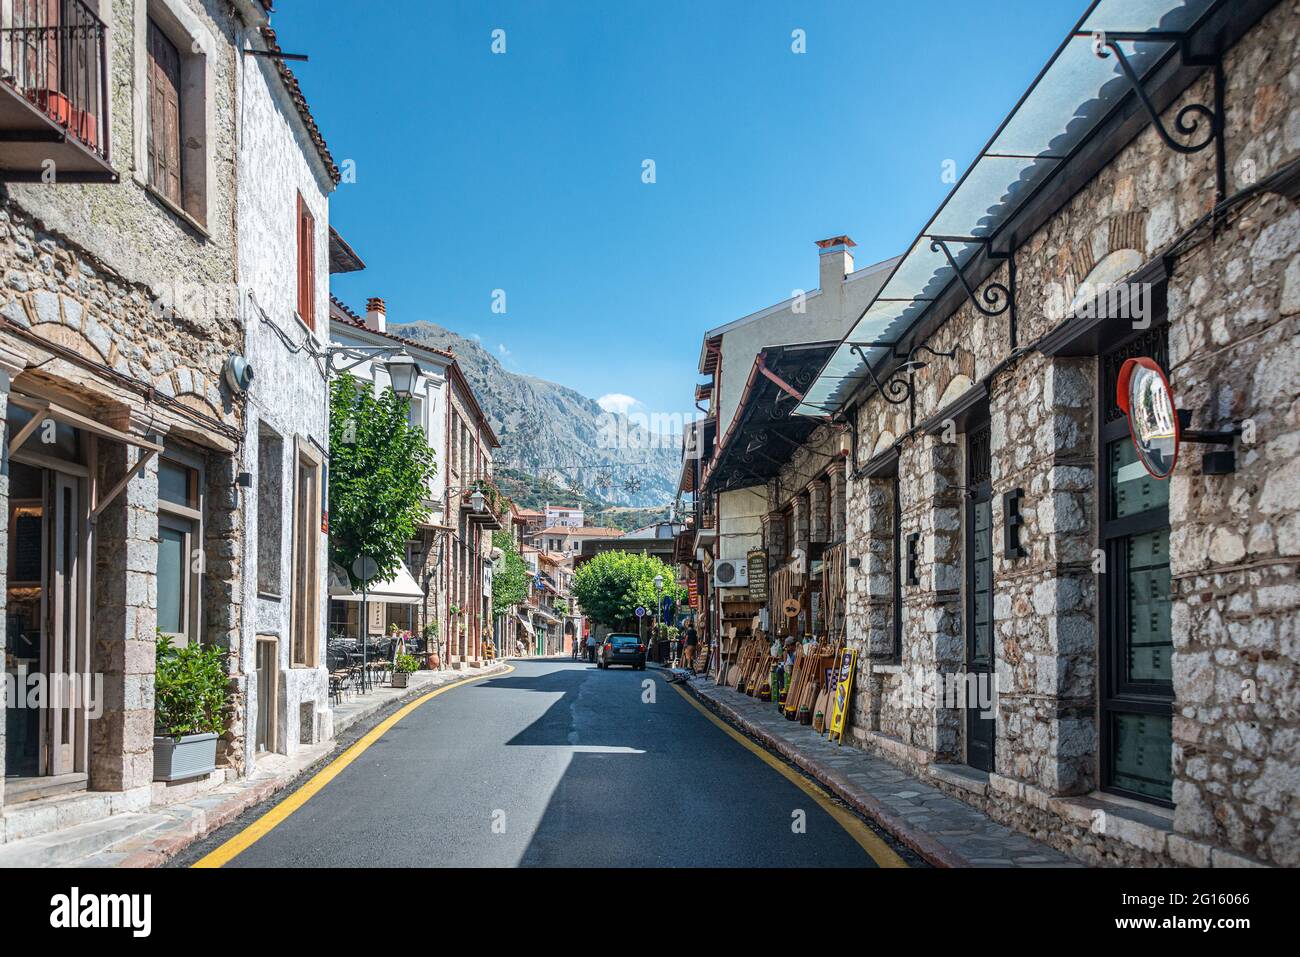 Cobbled alley and stone houses in the mountain town of Arachova at the foot of Mount Parnassos in Viotia, Greece Stock Photo